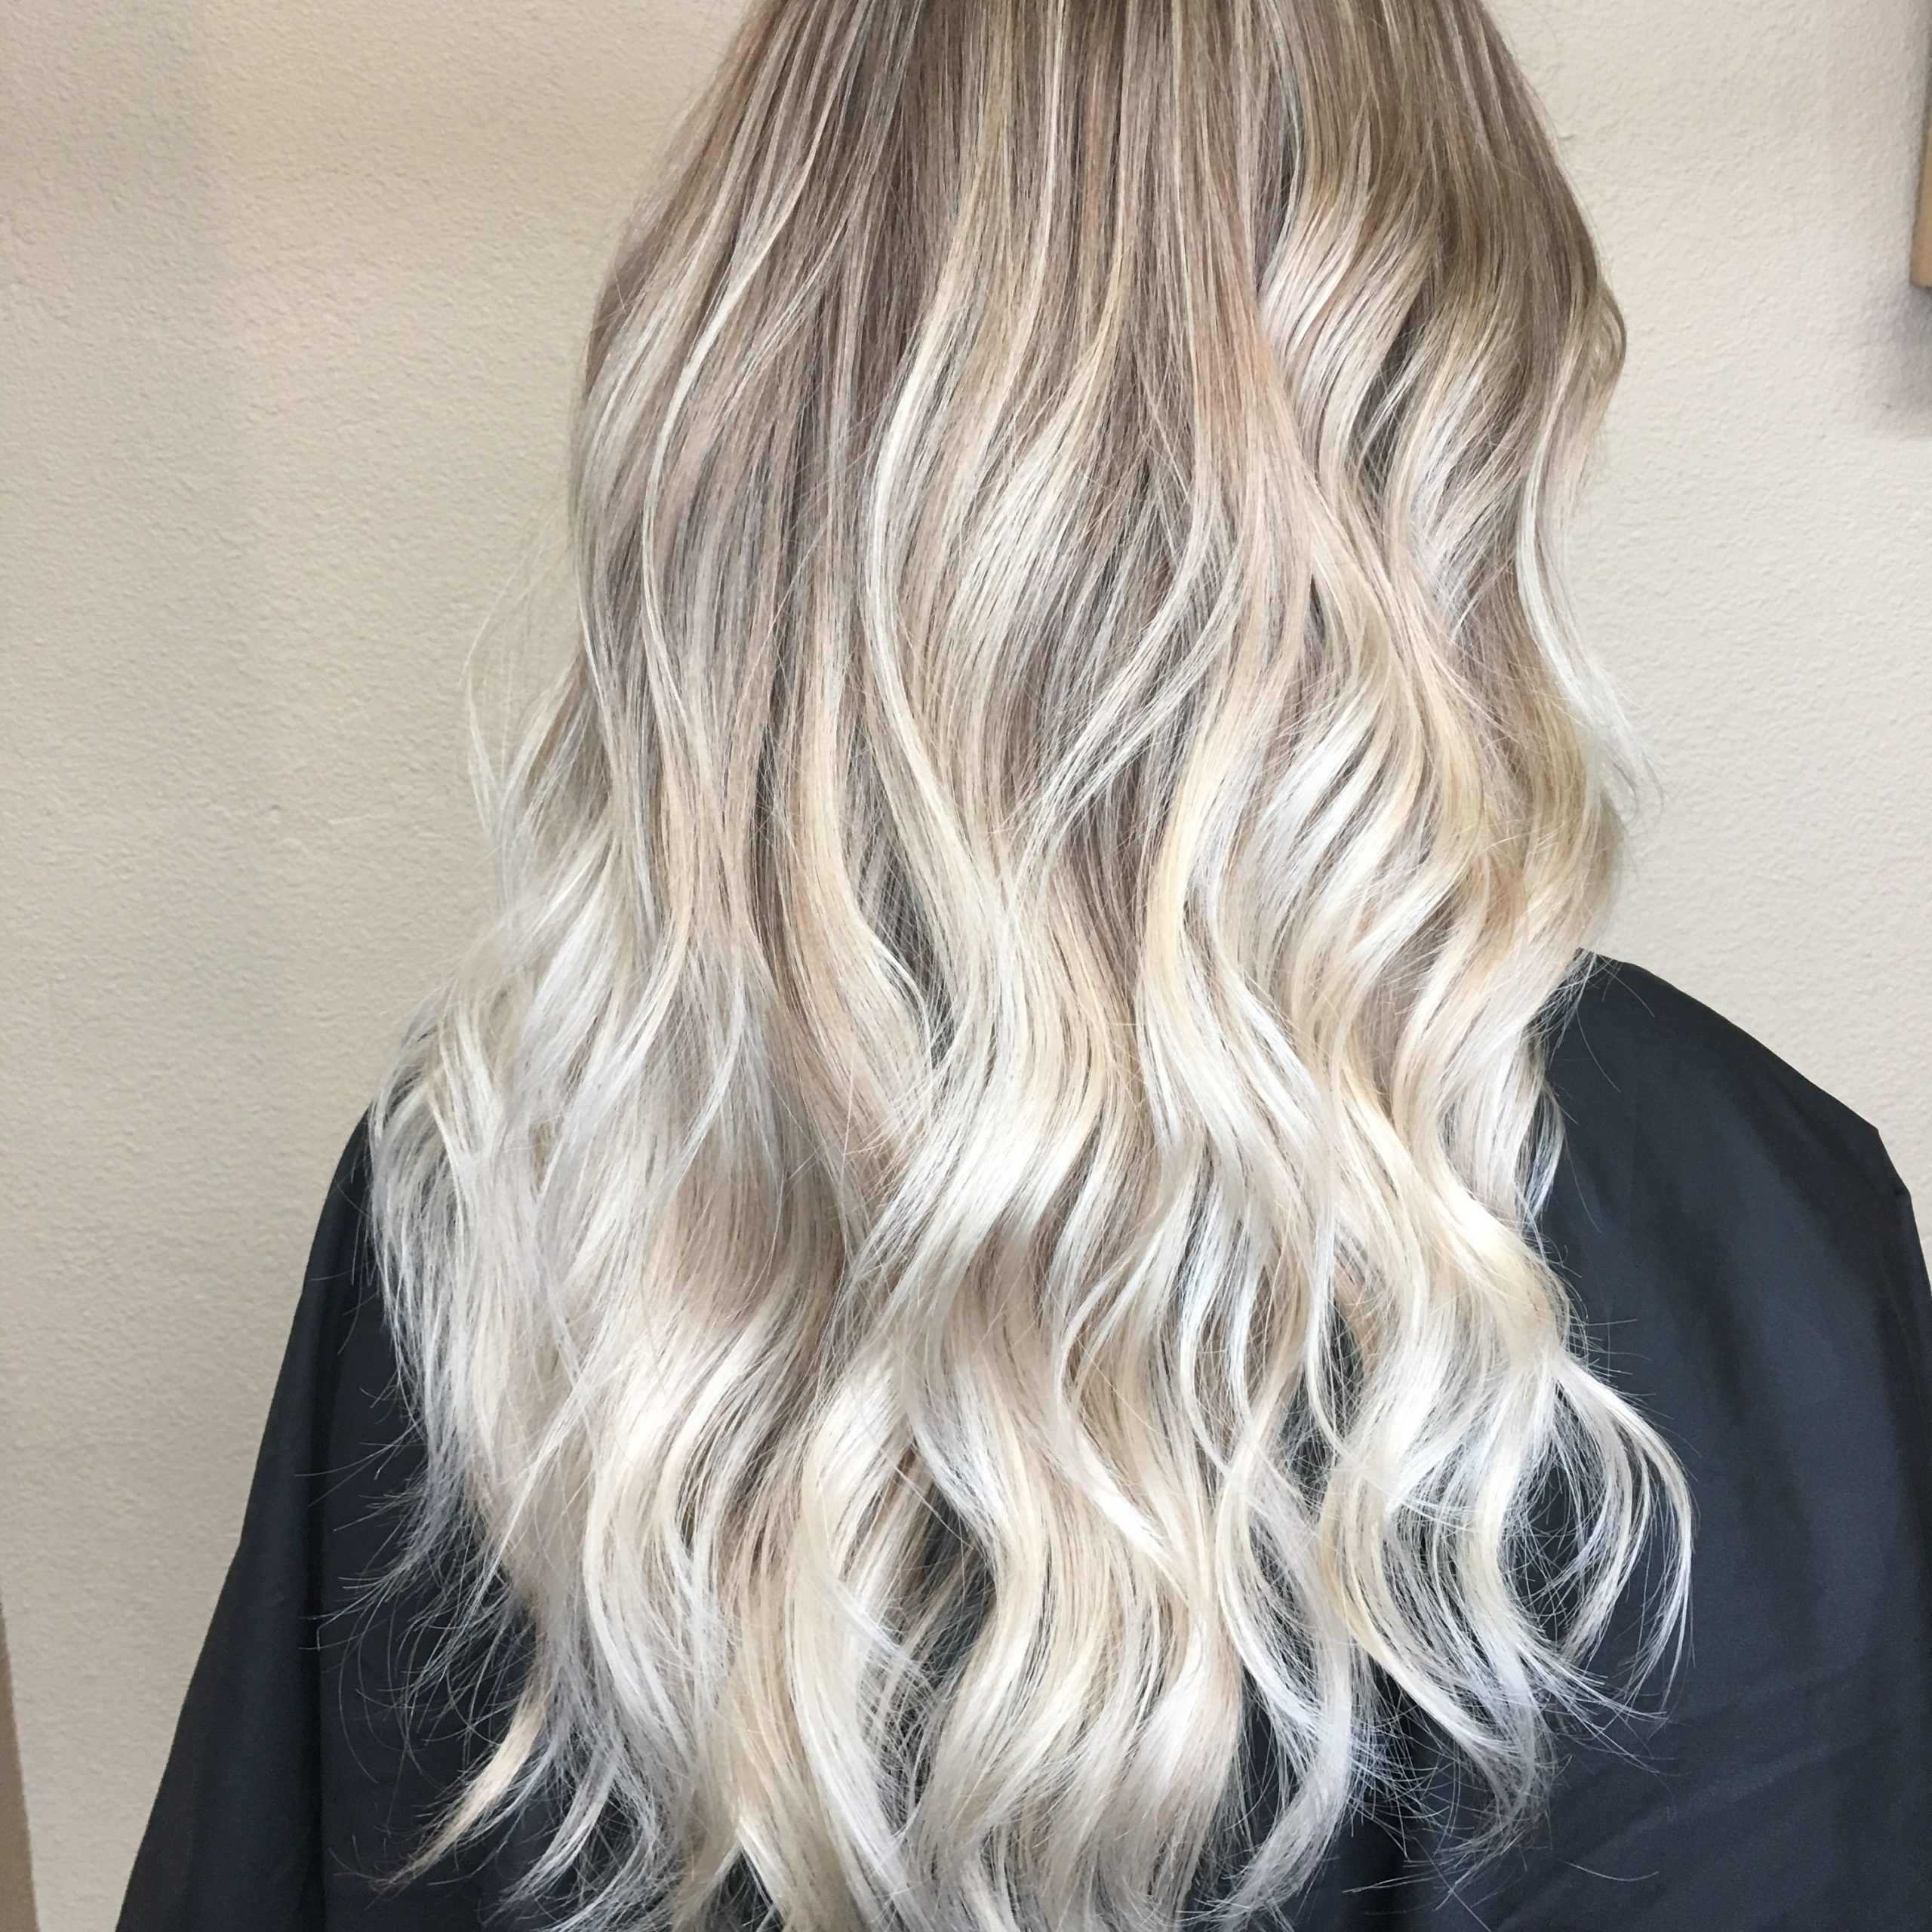 Icy Blonde, Creamy Tone, Soft Waves, Medium Length Hair (View 4 of 20)